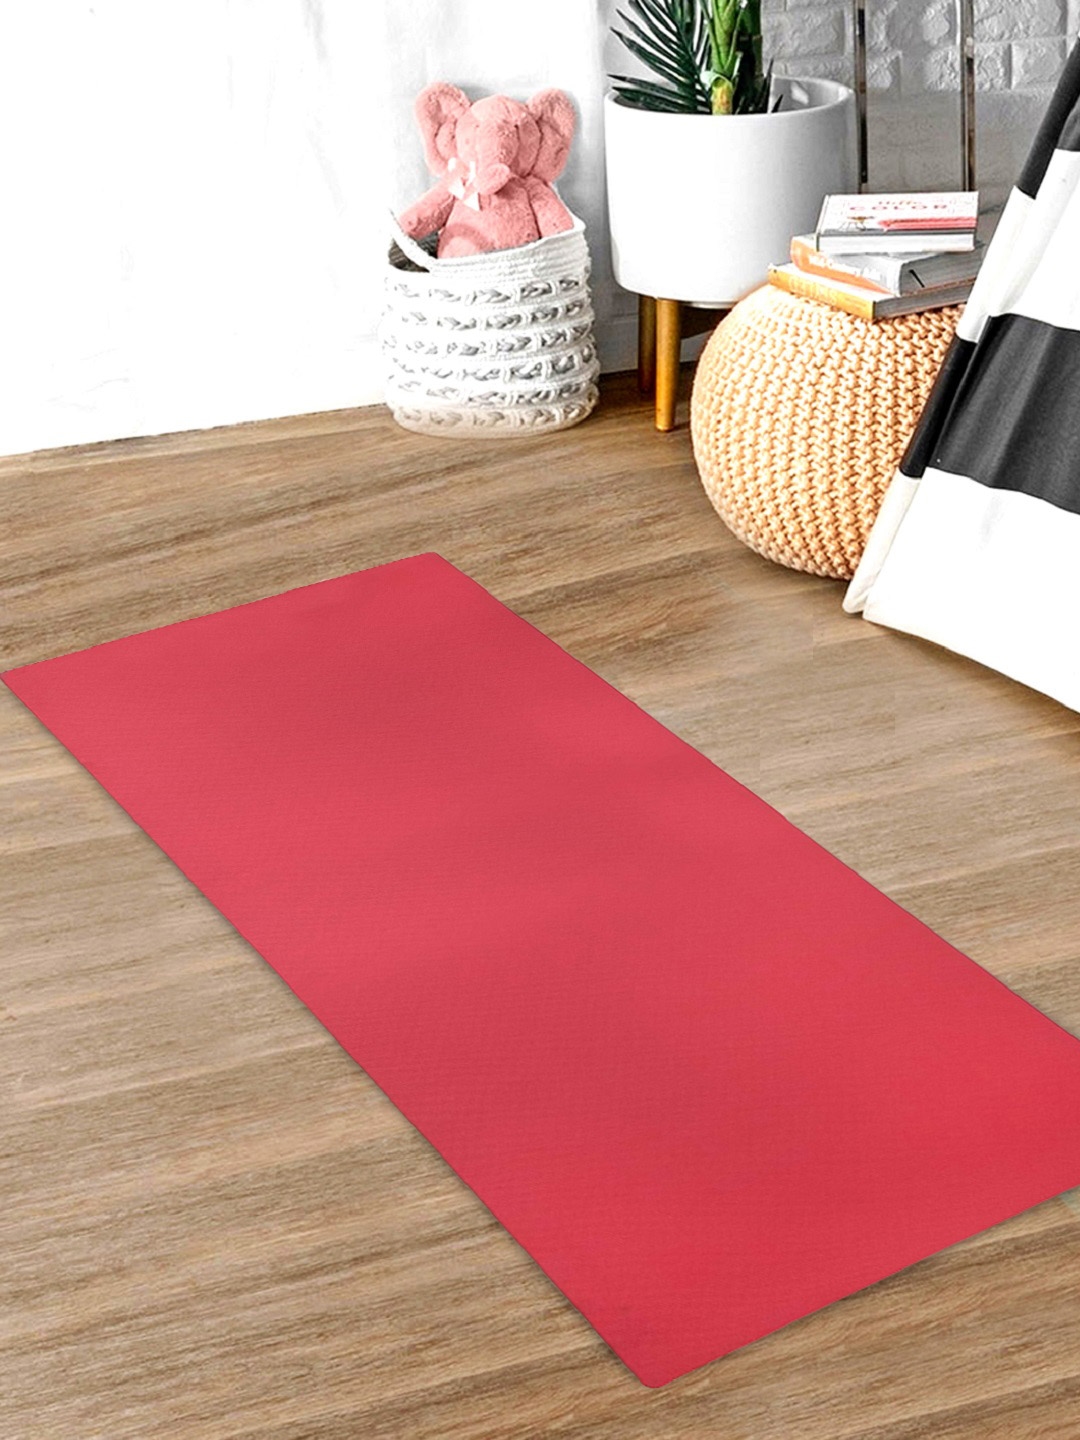 Kuber Industries Red Solid 4 mm Extra Thick Yoga mat for Gym Workout and Flooring Exercise